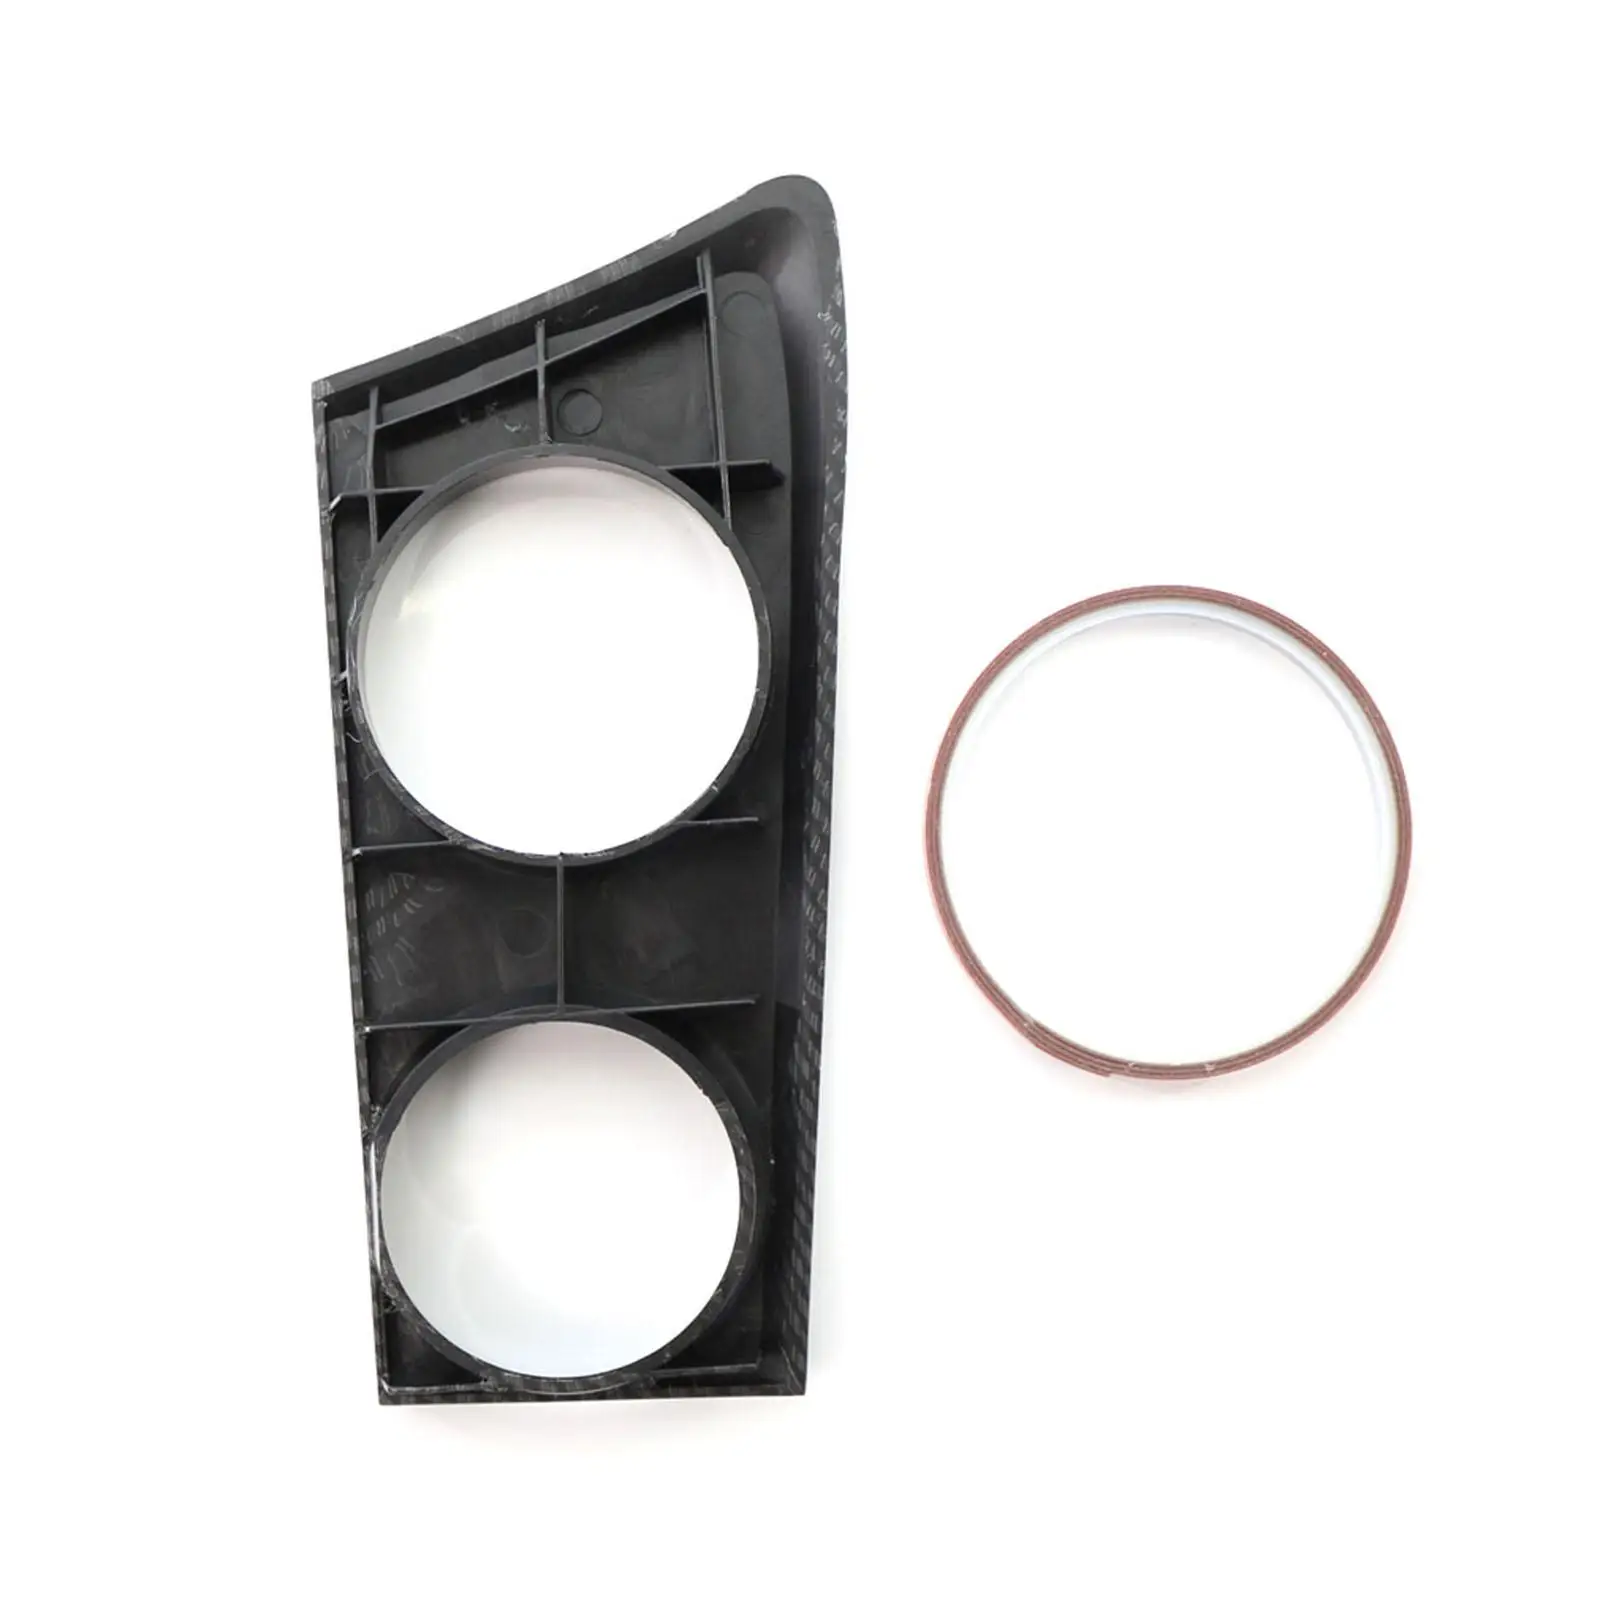 Carbon Fiber Cup Holder Accessories for  E87 1 Series E82 Drinks Left